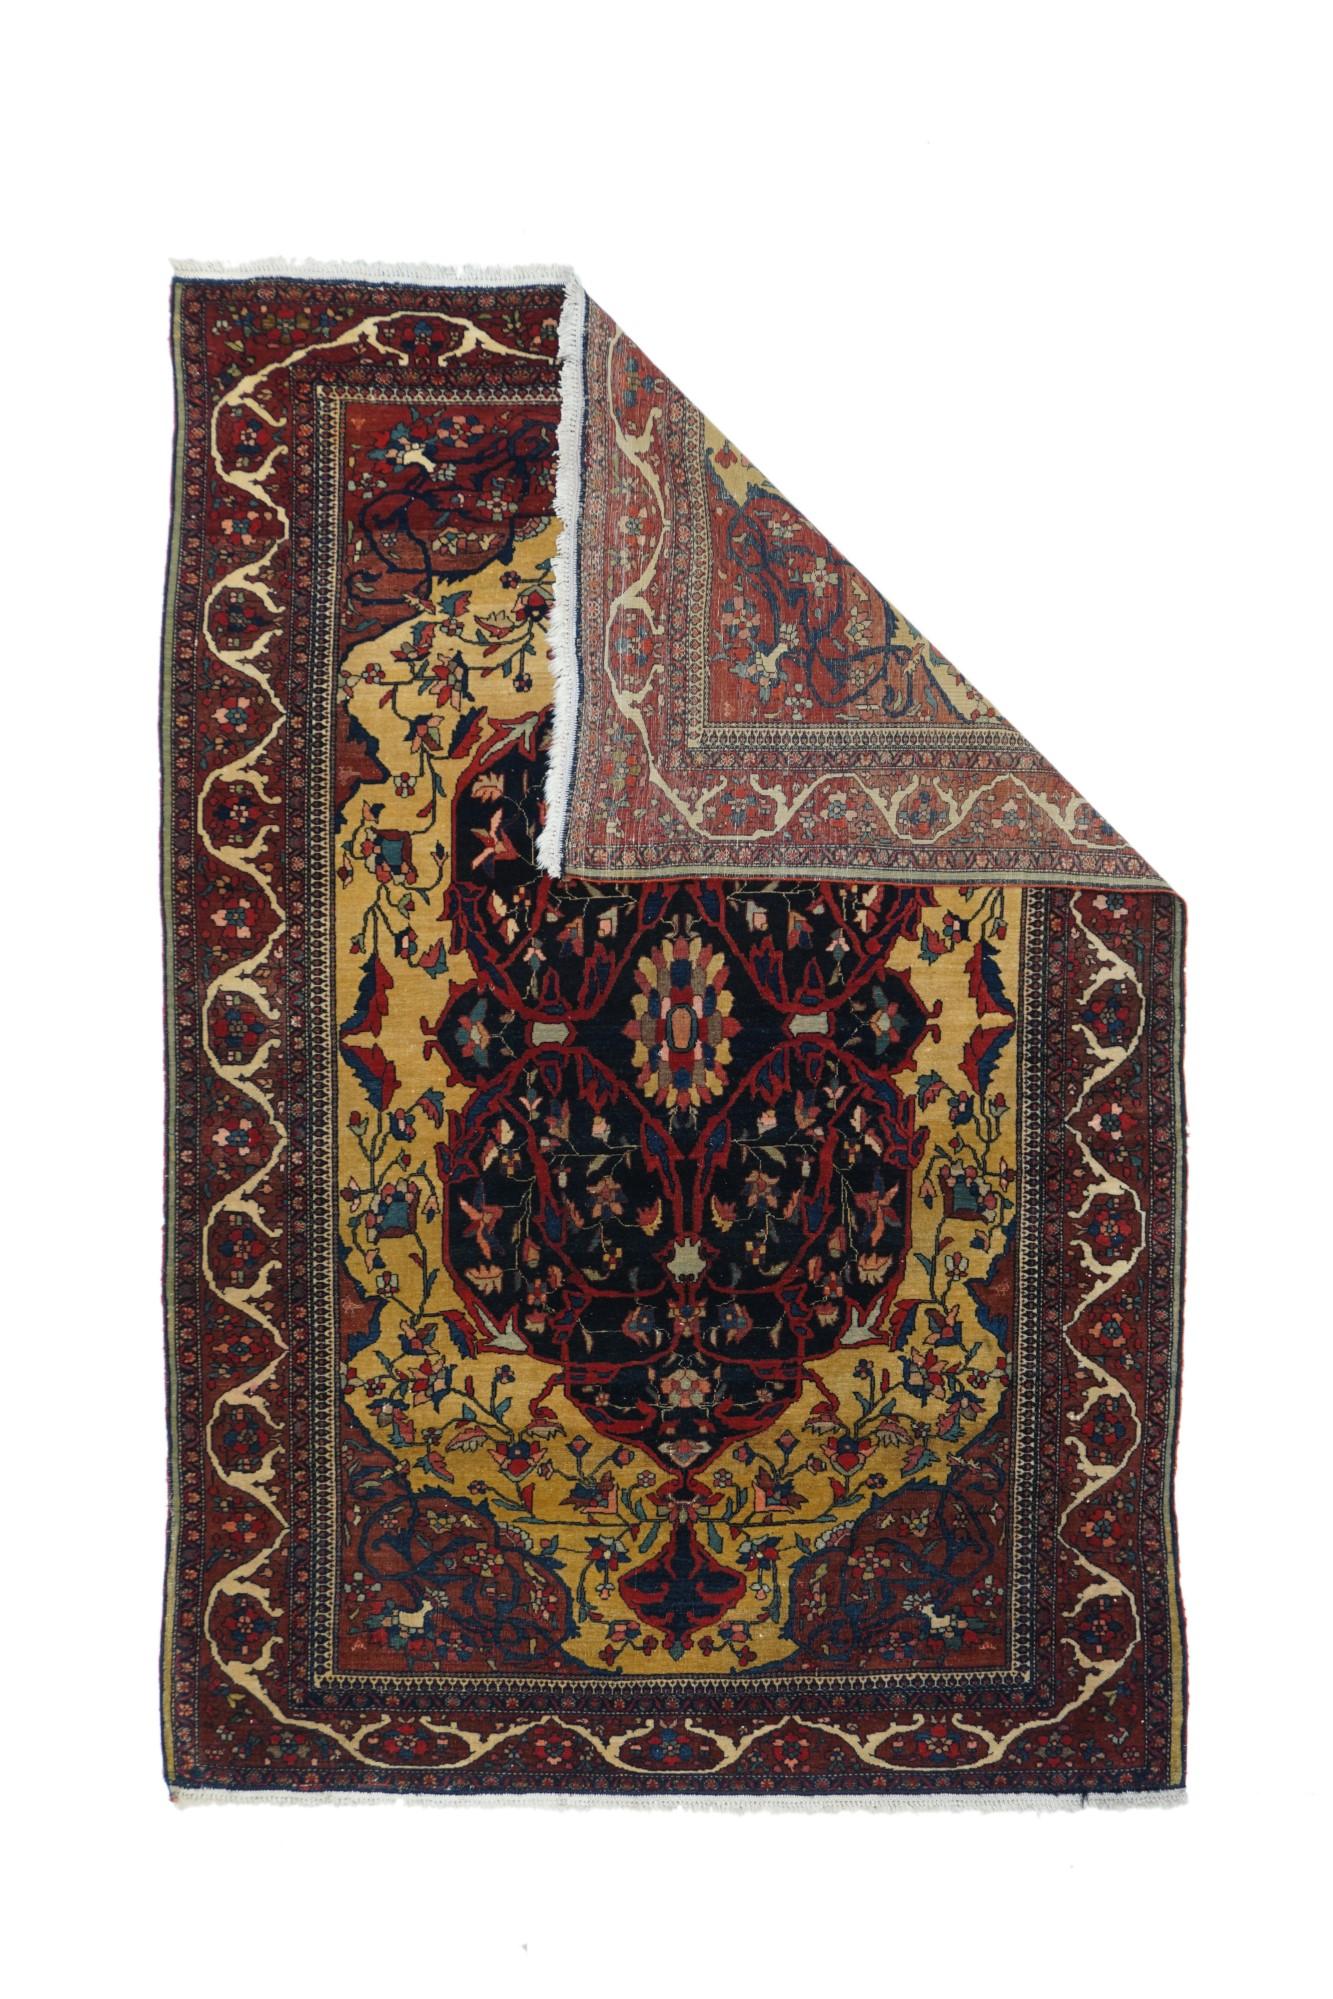 `This very attractive west Persian village scatter is particularly unusual for several reasons: the goldenrod field is extremely recherchŽ for this weaving type. The red main border displays a forked arabesque meander with rational corner